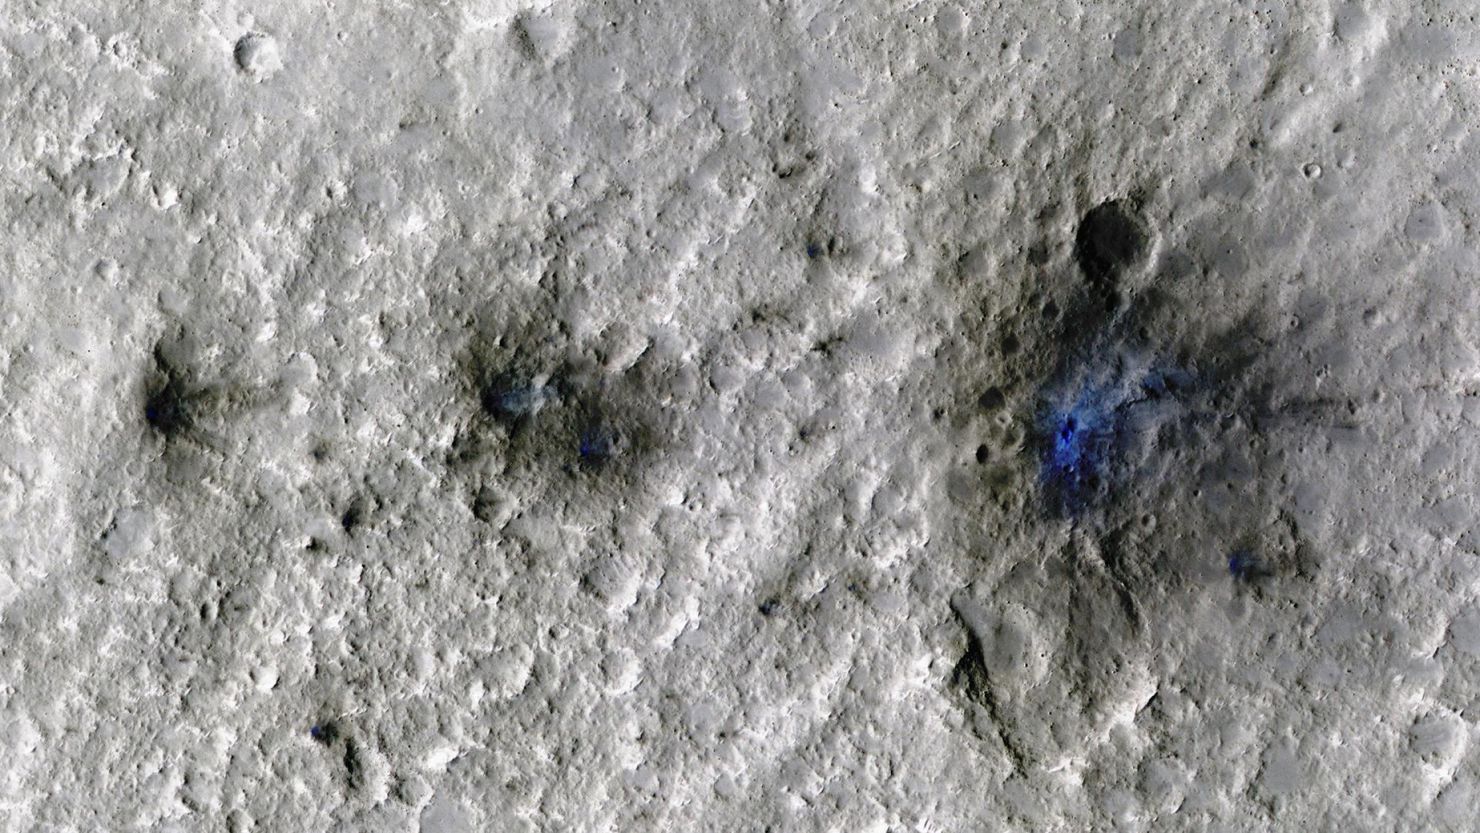 A meteoroid impact on Mars formed Martian craters, seen in blue, on September 5, 2021. NASA's InSight mission detected the impacts, and the Mars Reconnaissance Orbiter imaged the craters.